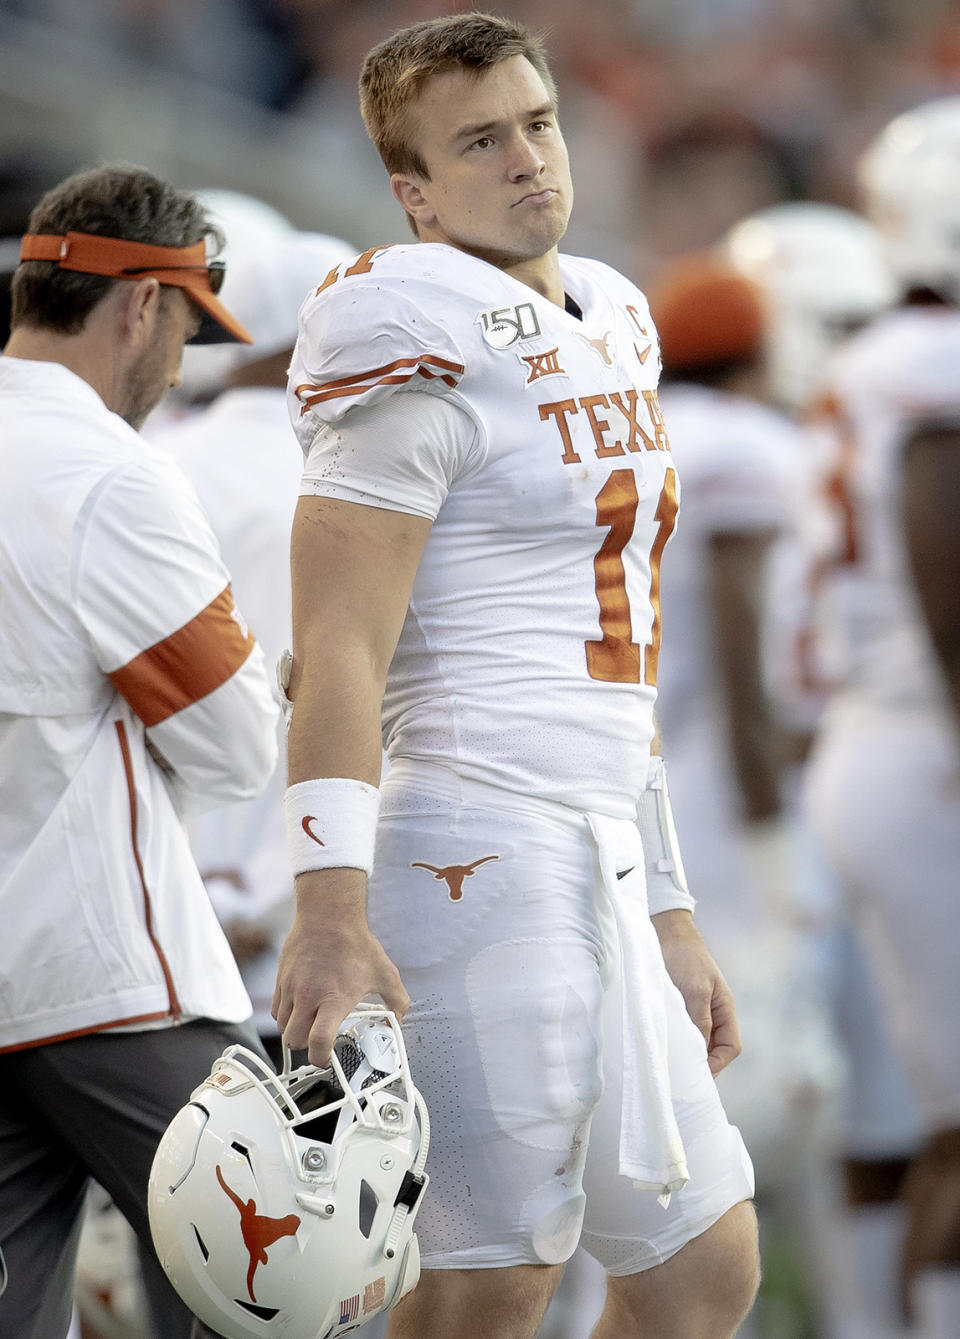 Texas quarterback Sam Ehlinger (11) stands on the sideline during an NCAA college football game against Baylor on Saturday, Nov. 23, 2019, in Waco, Texas. (Nick Wagner/Austin American-Statesman via AP)